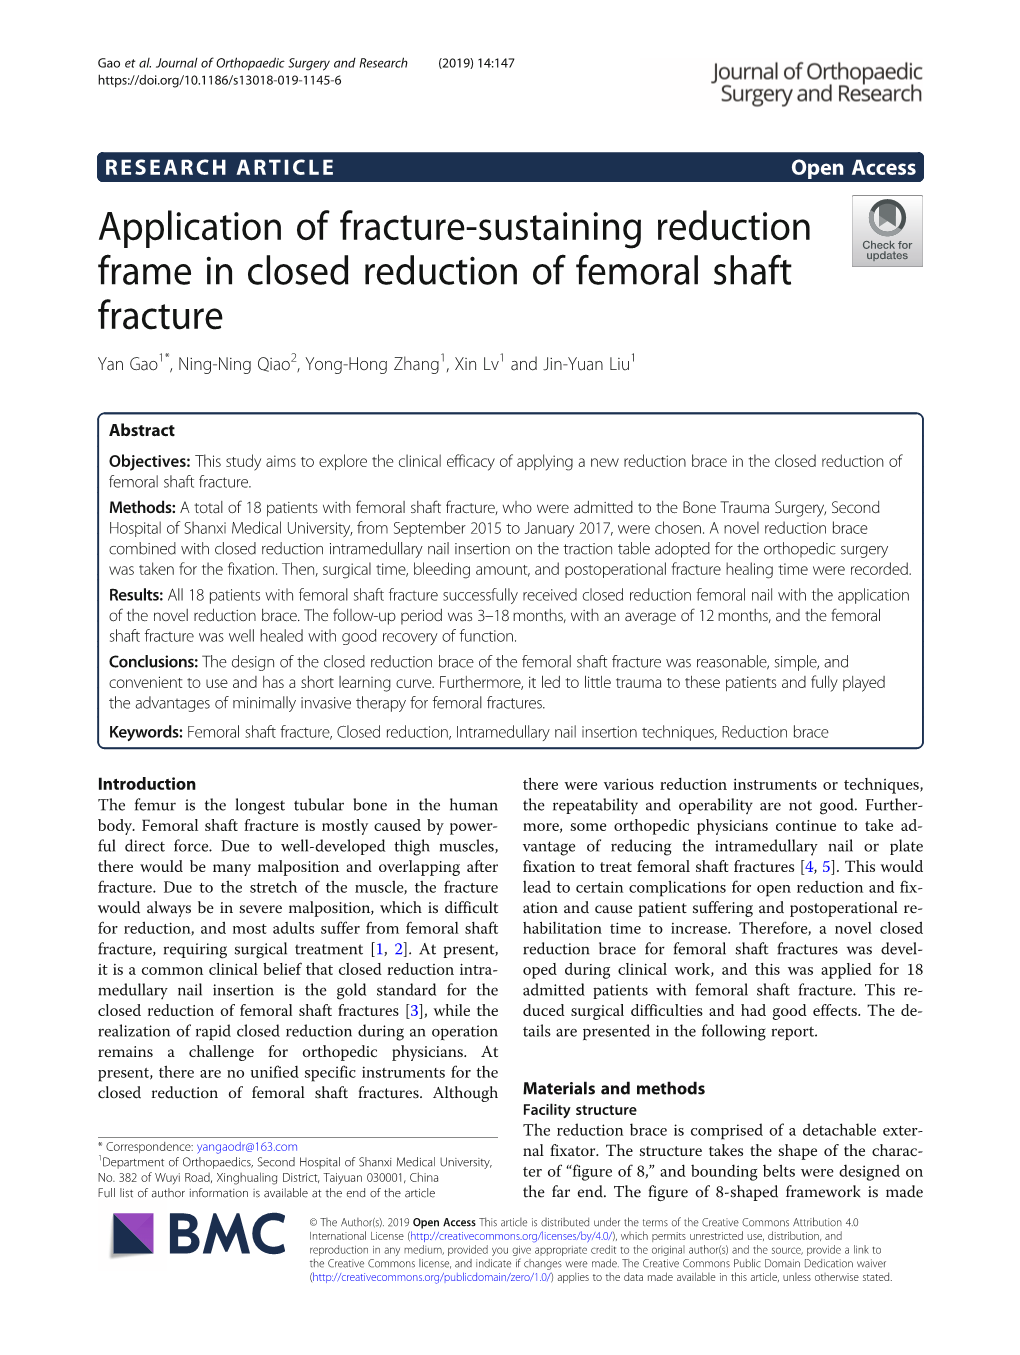 Application of Fracture-Sustaining Reduction Frame in Closed Reduction